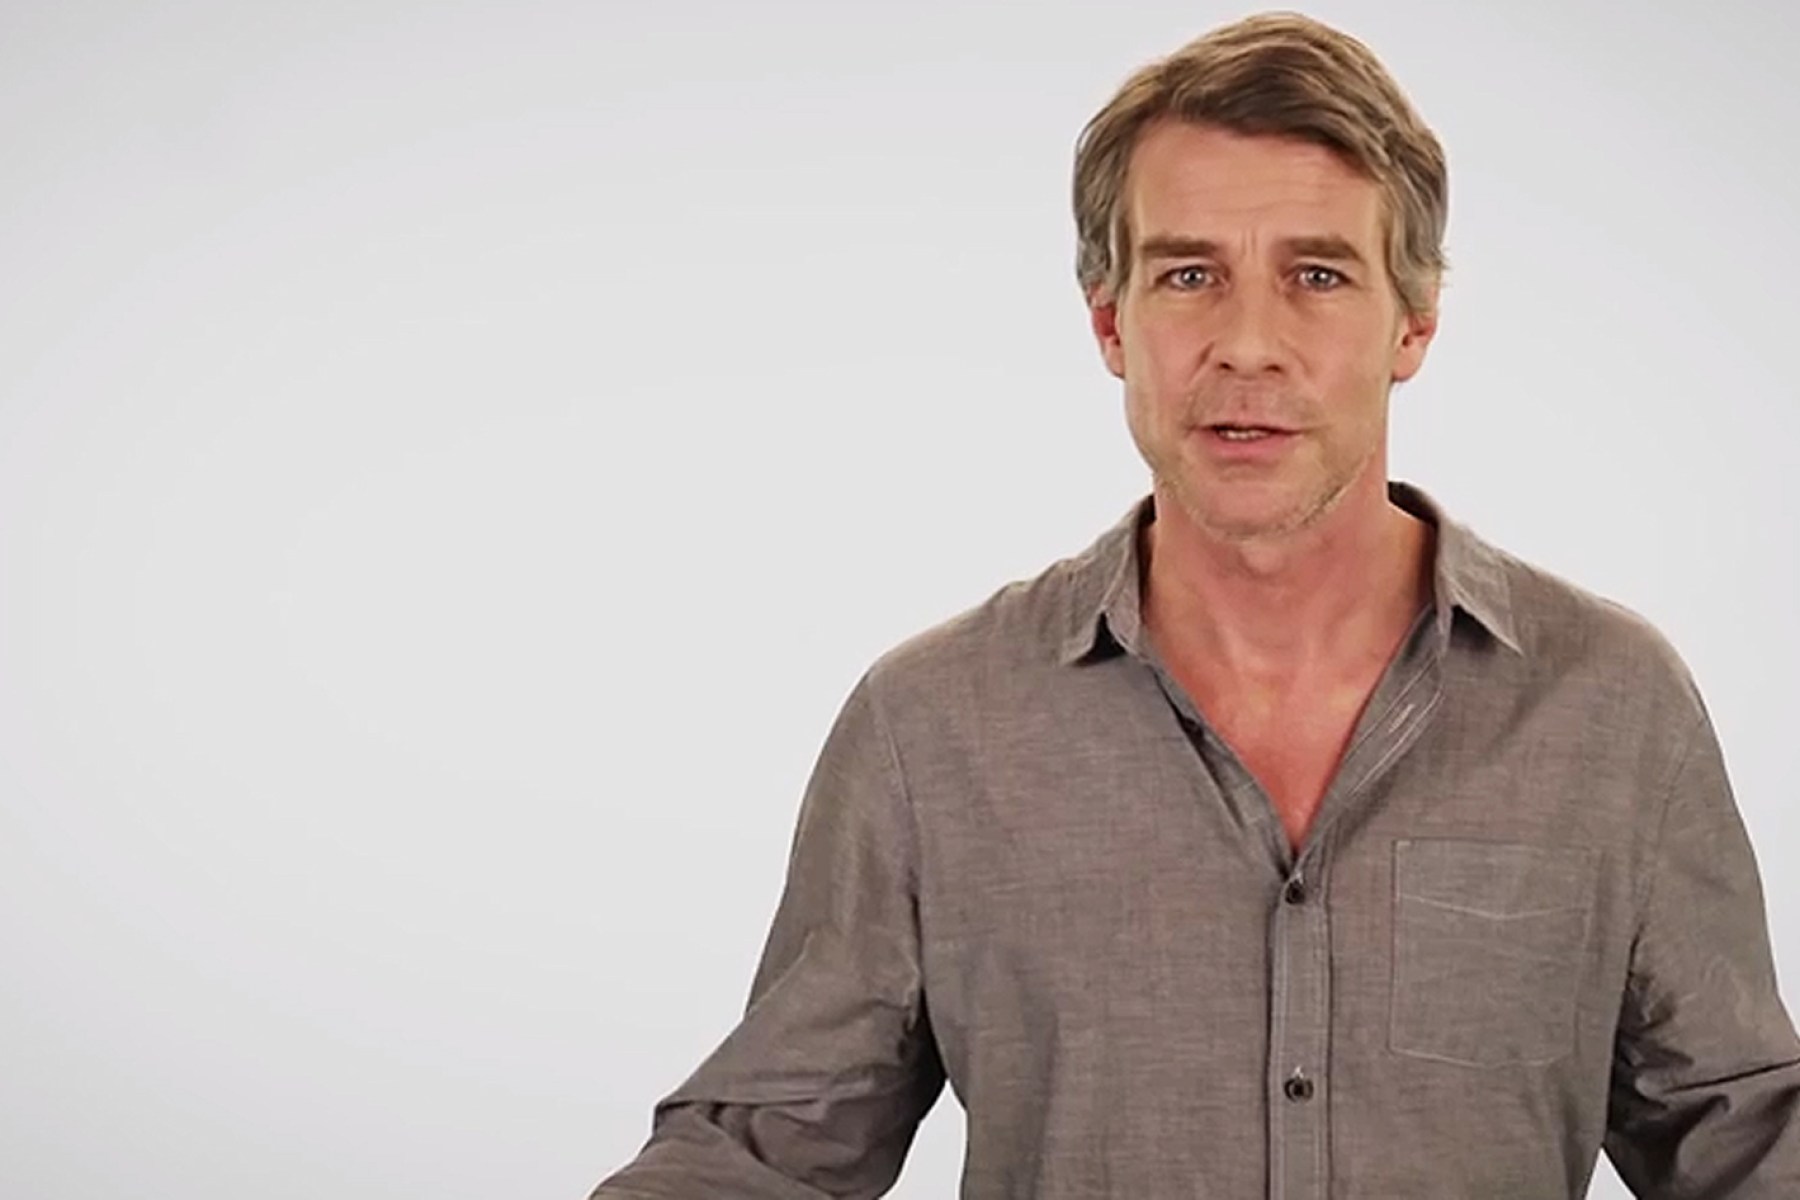 bill trumbull reccomend what happened to the trivago girl pic